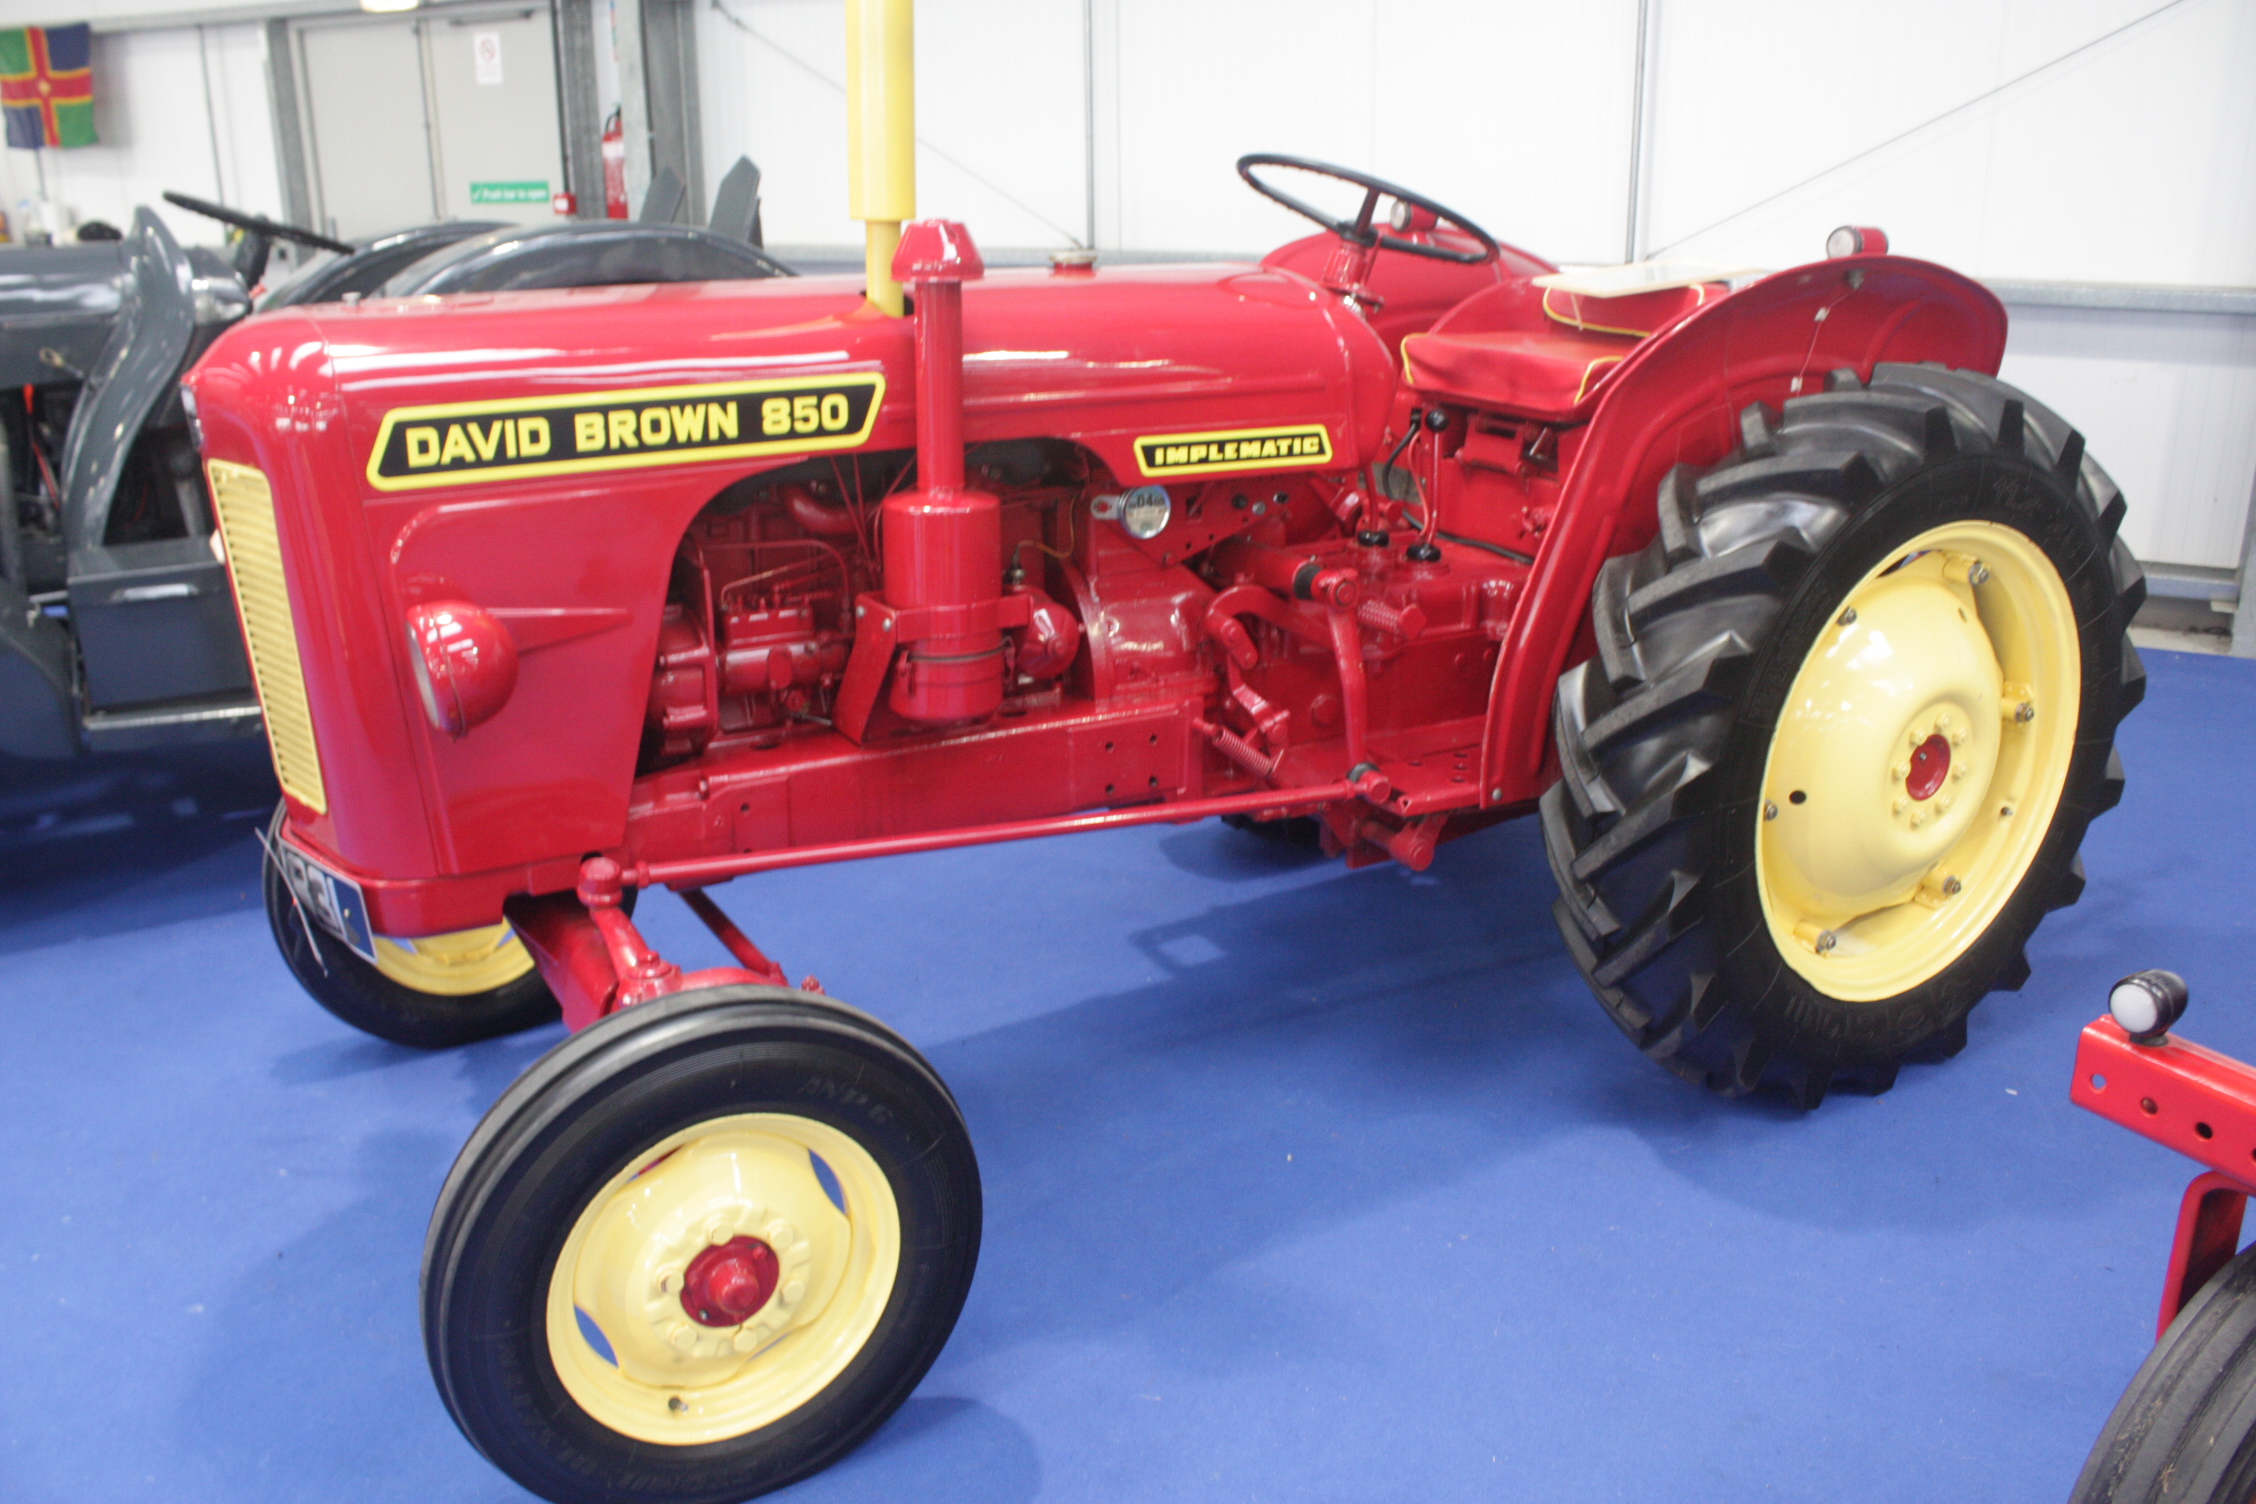 David Brown 850 Implematic - Tractor & Construction Plant Wiki ...